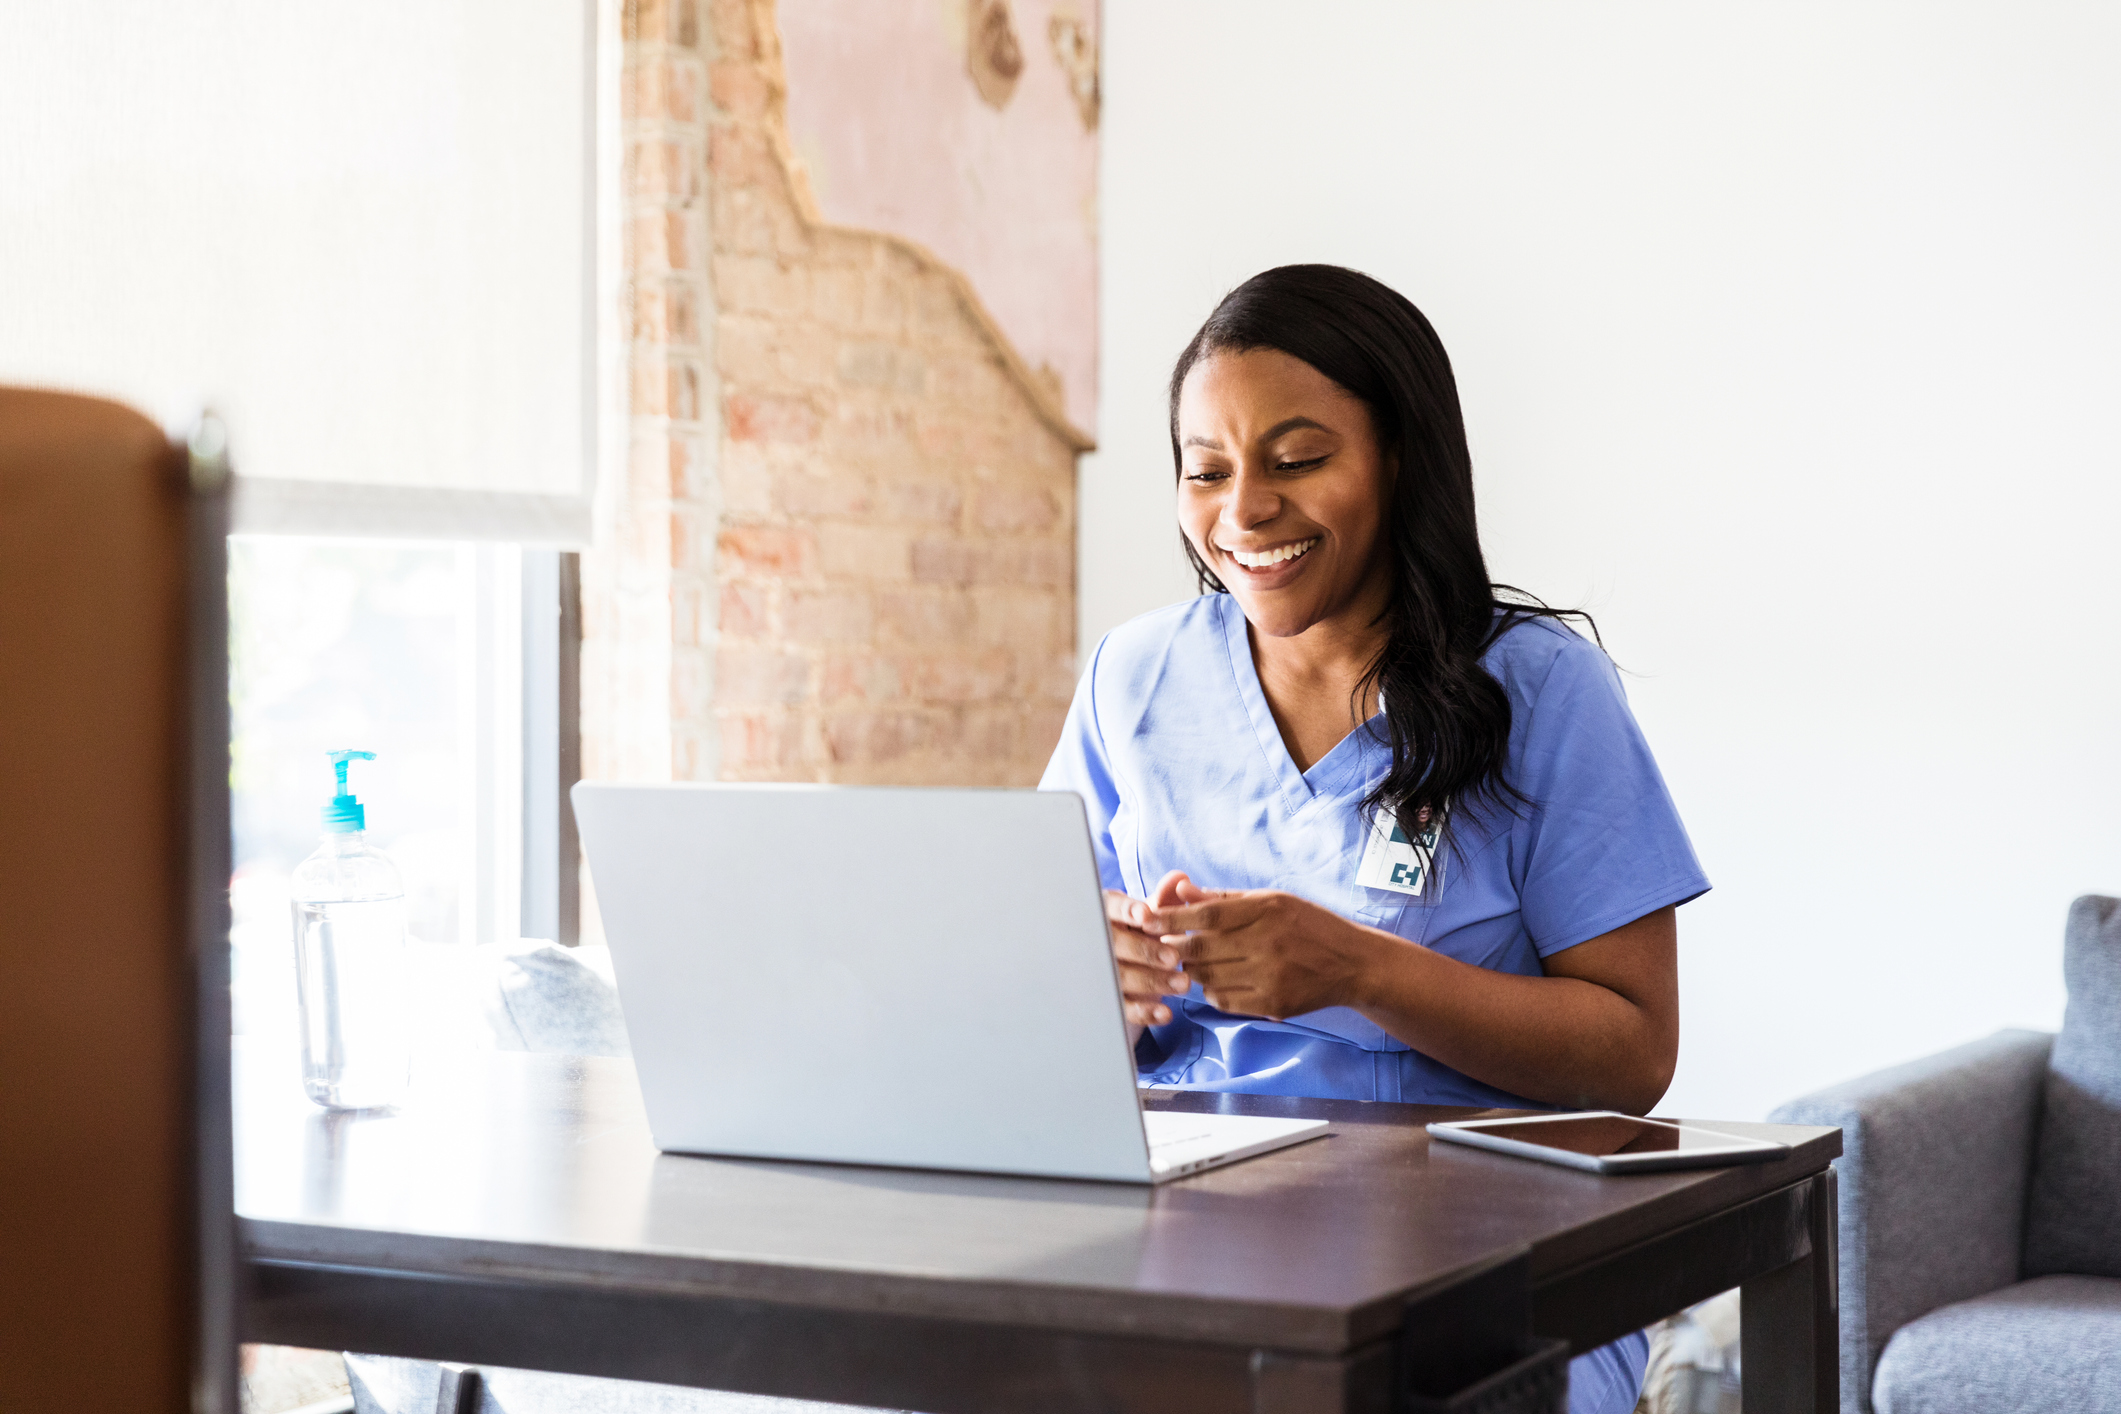 3 Things You Need To Advance Your Nursing Career